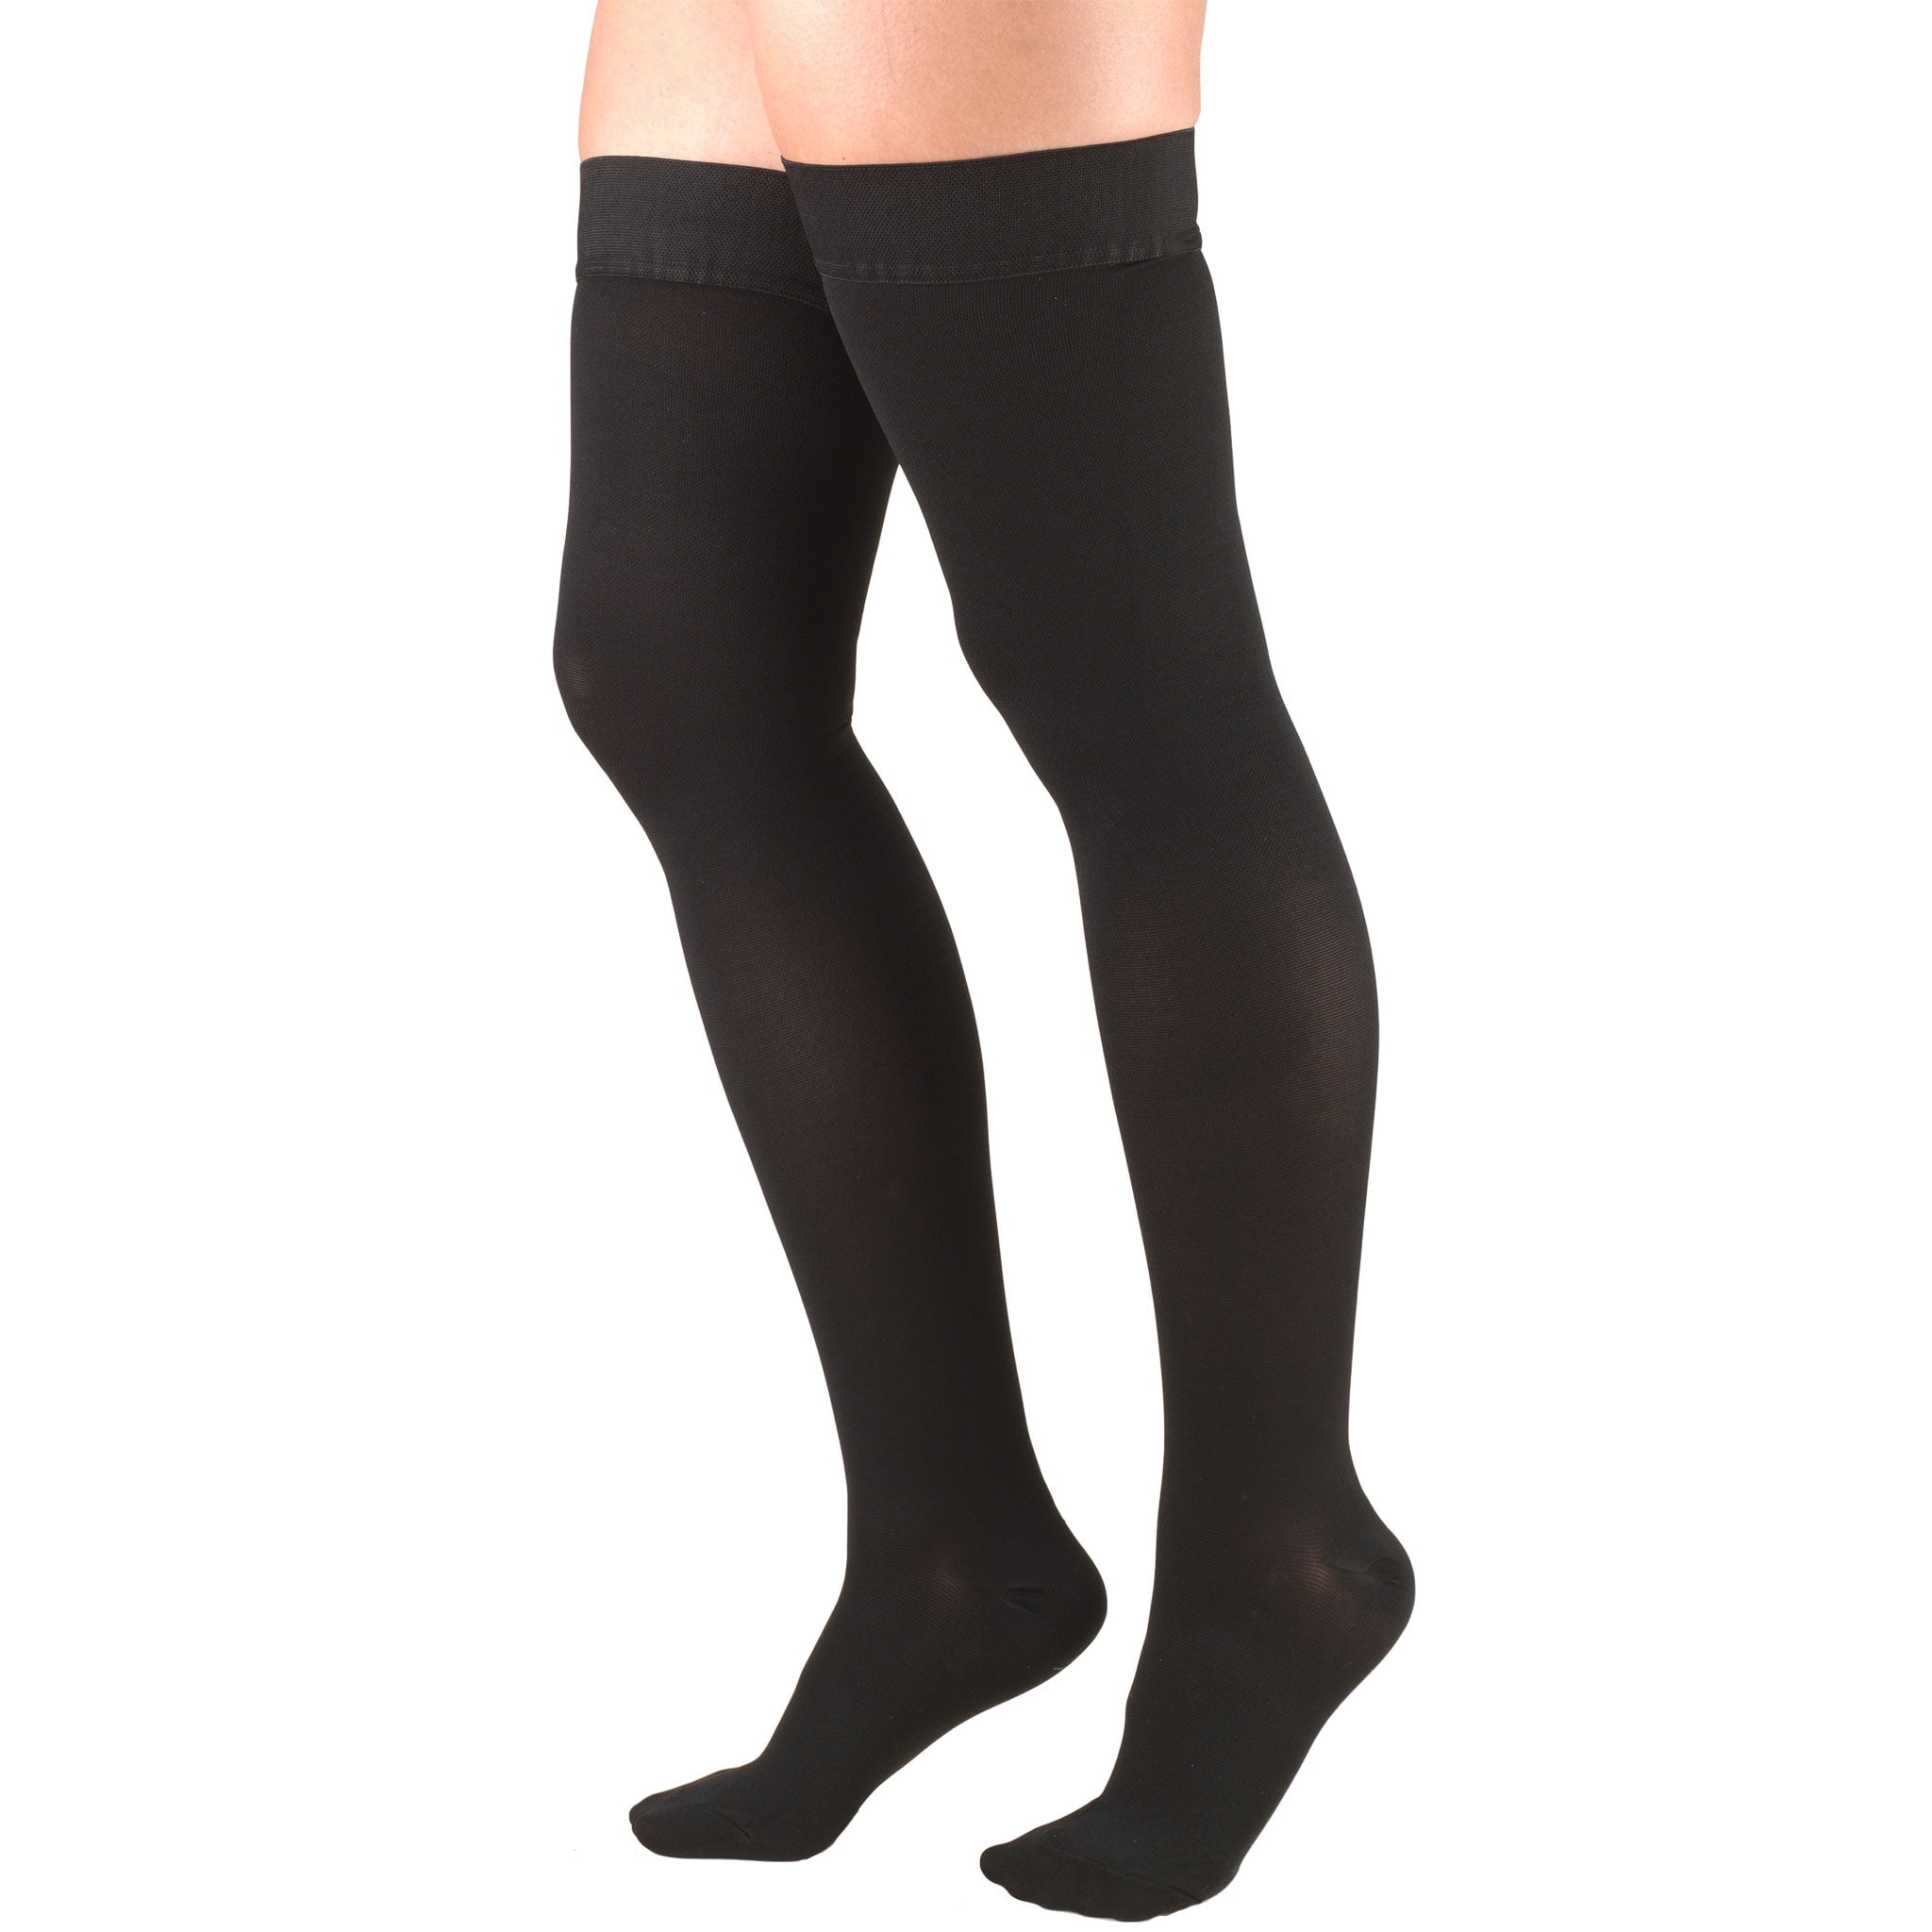 JOBST® For Men Thigh High 20-30mmHg Compression Stockings